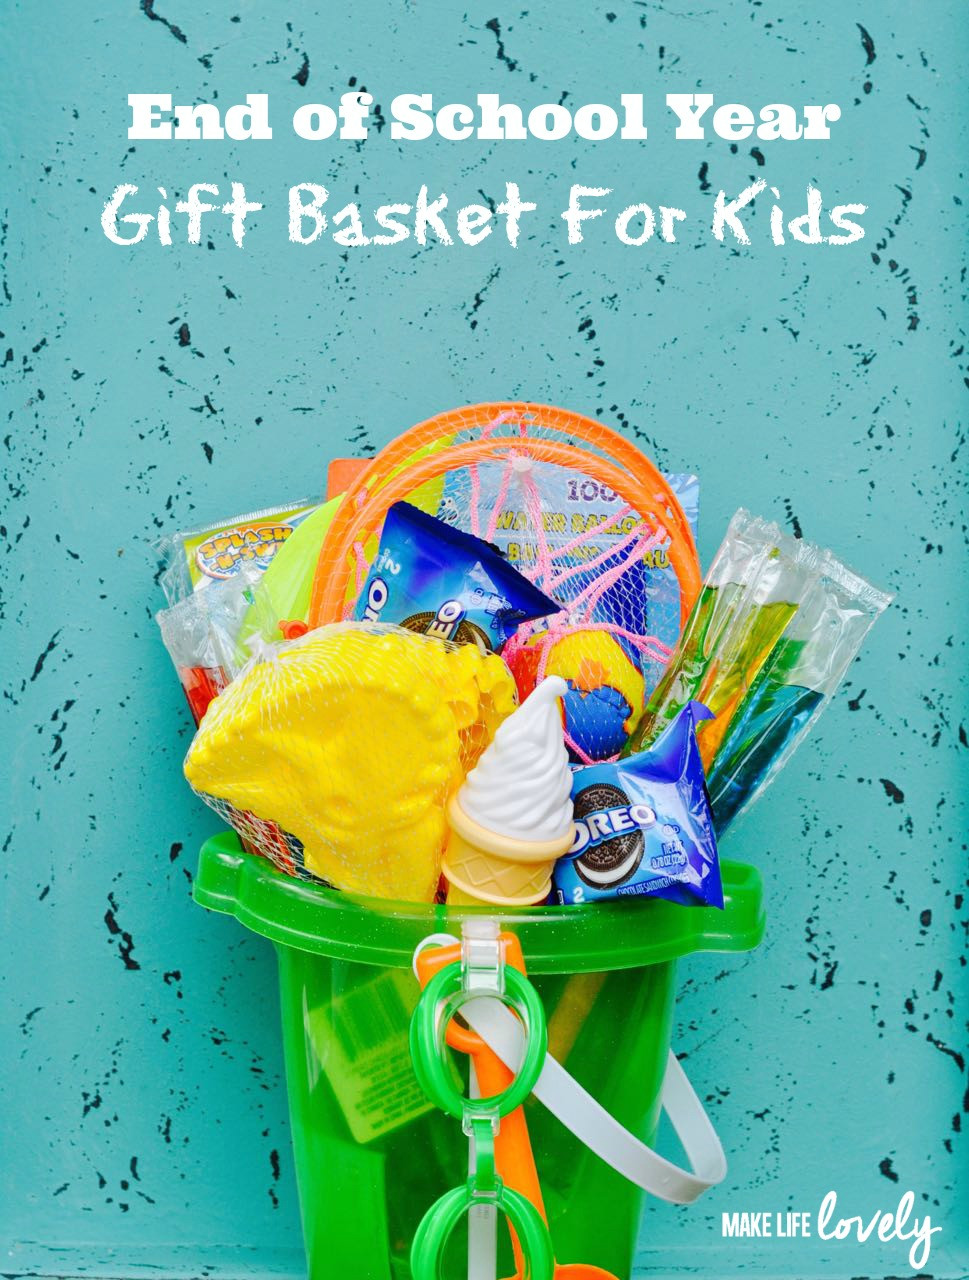 End Of School Year Gifts For Kids
 End of School Year Gift for Kids Make Life Lovely